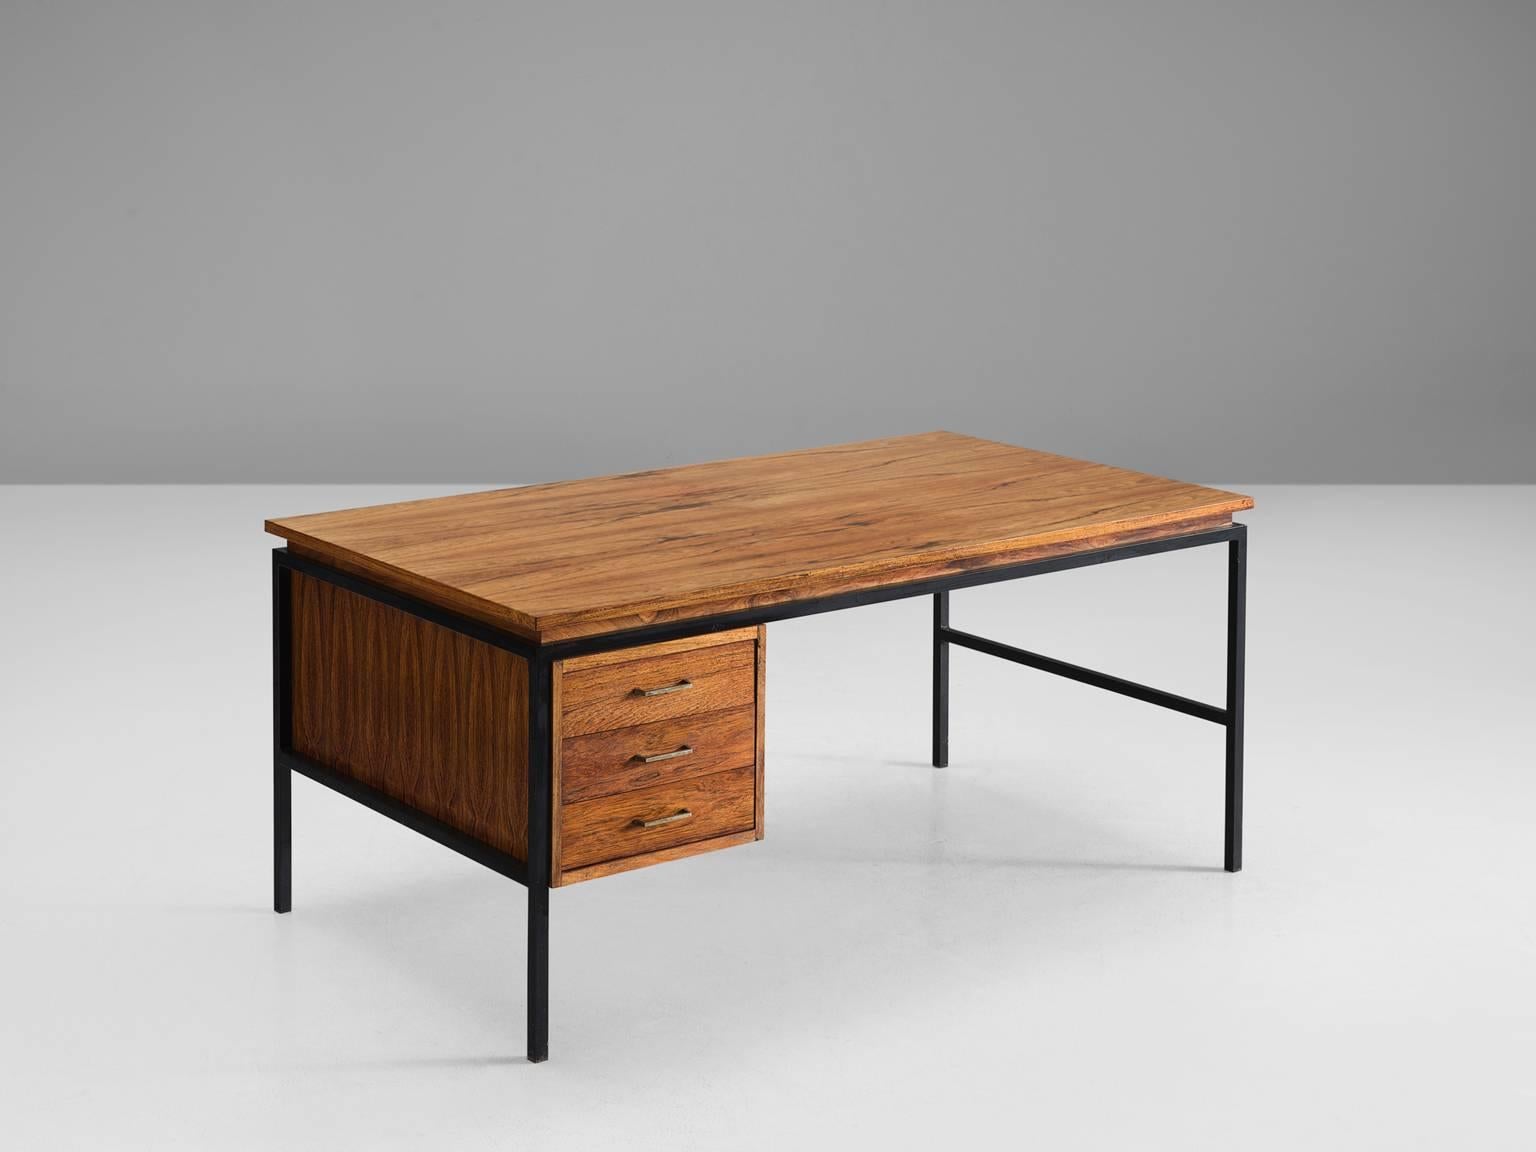 Executive desk, in rosewood and metal, Denmark, 1960s.

Freestanding desk in rosewood and black metal. This functional, minimalist and elegant writing desk is designed with high attention to detail. The steel frame is simplistic and functional.